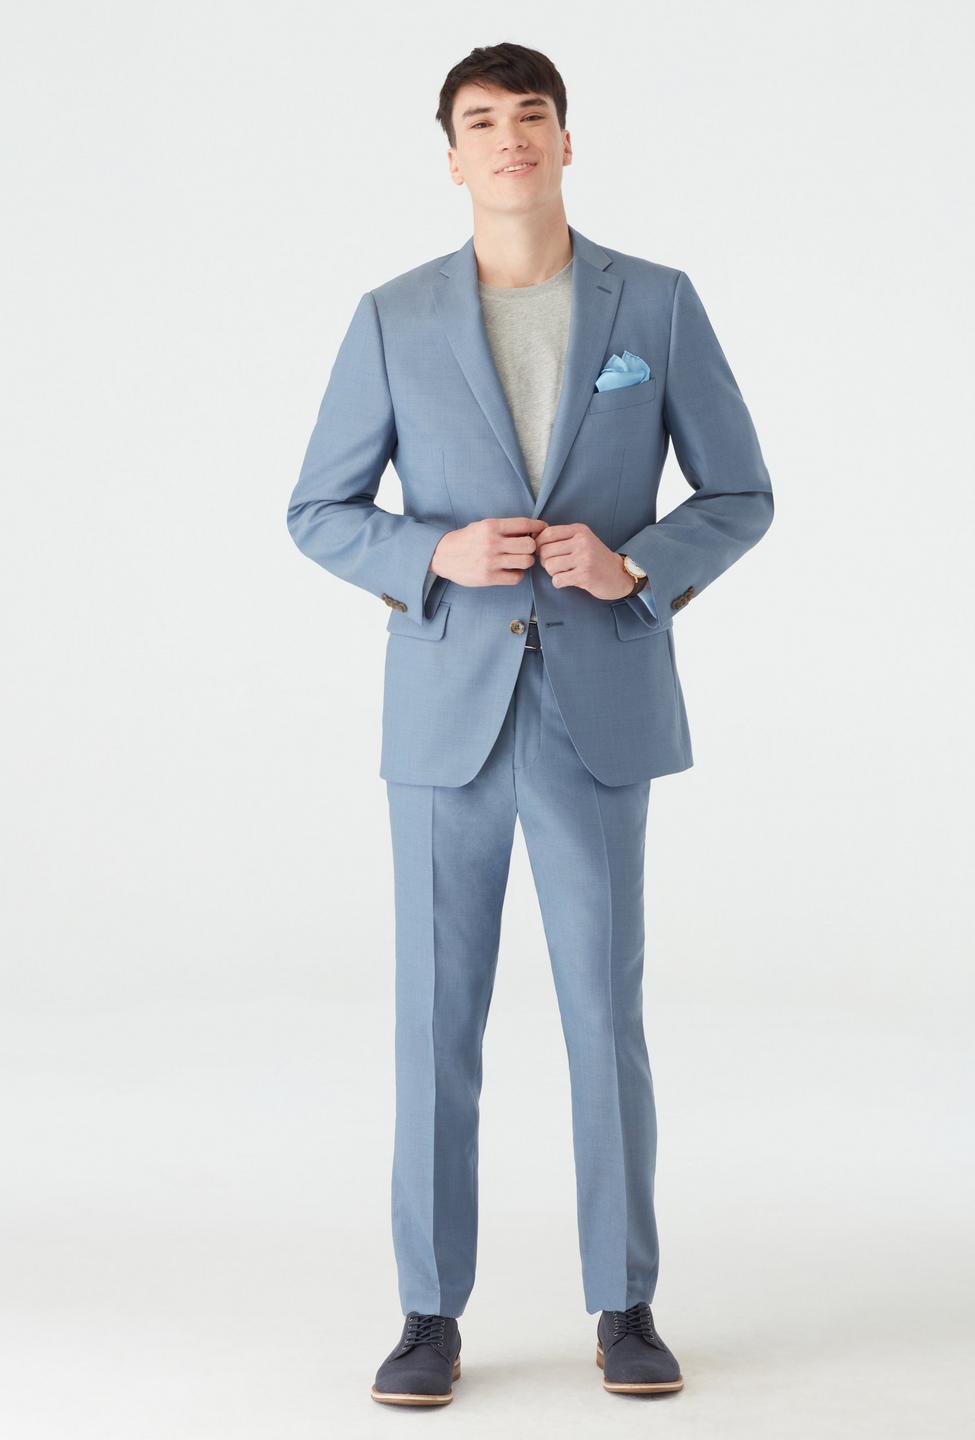 Blue suit - Solid Design from Seasonal Indochino Collection